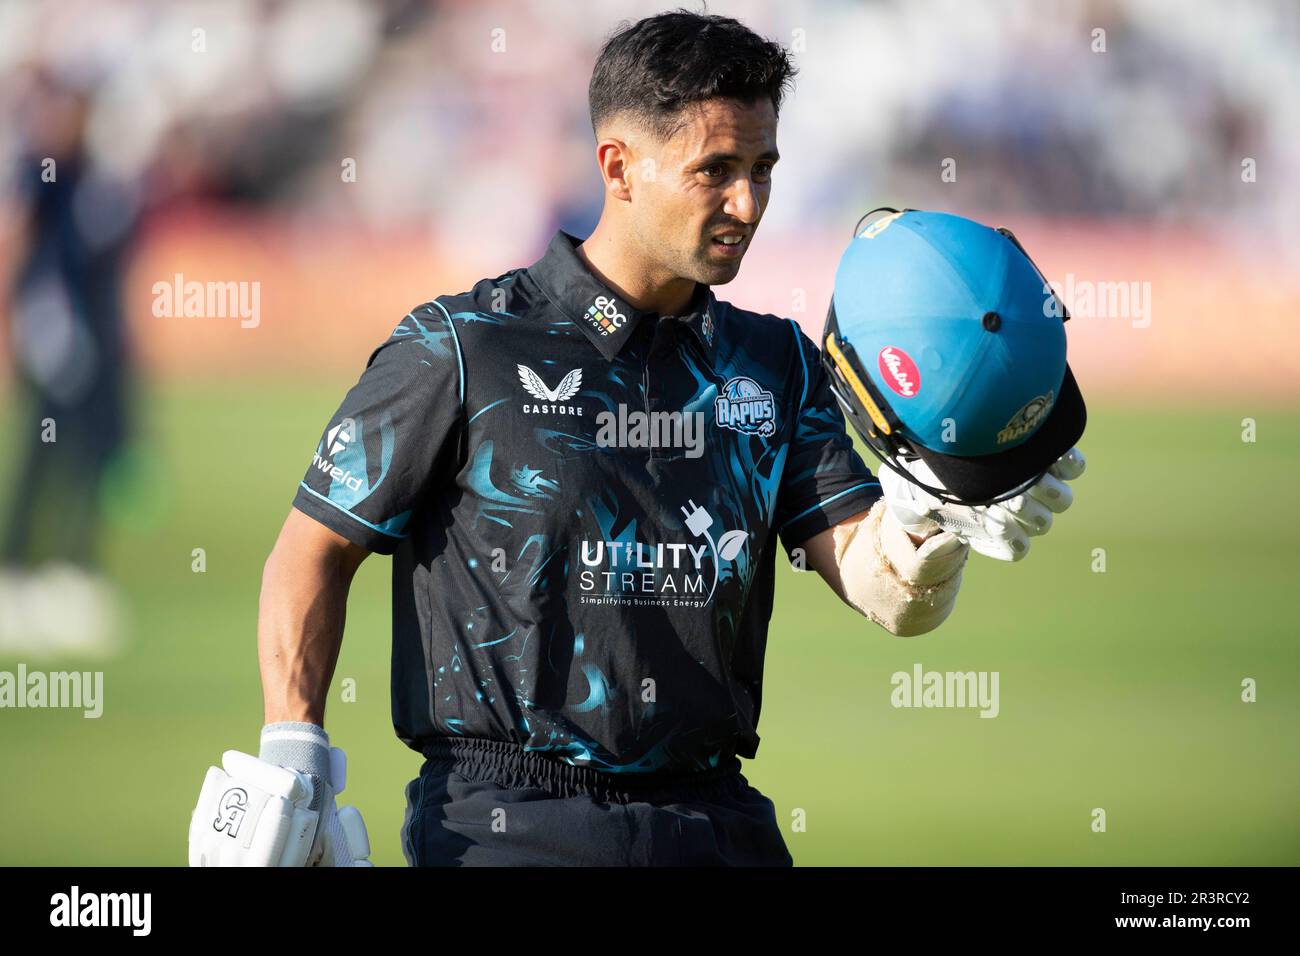 Northampton May 24 Brett DOliveira (captain) WORCESTERSHIRE RAPIDS out during the Vitality T20 Blast match between Northamptonshire Steelbacks and Worcestershire Rapids at The County Ground Northampton England Stock Photo 